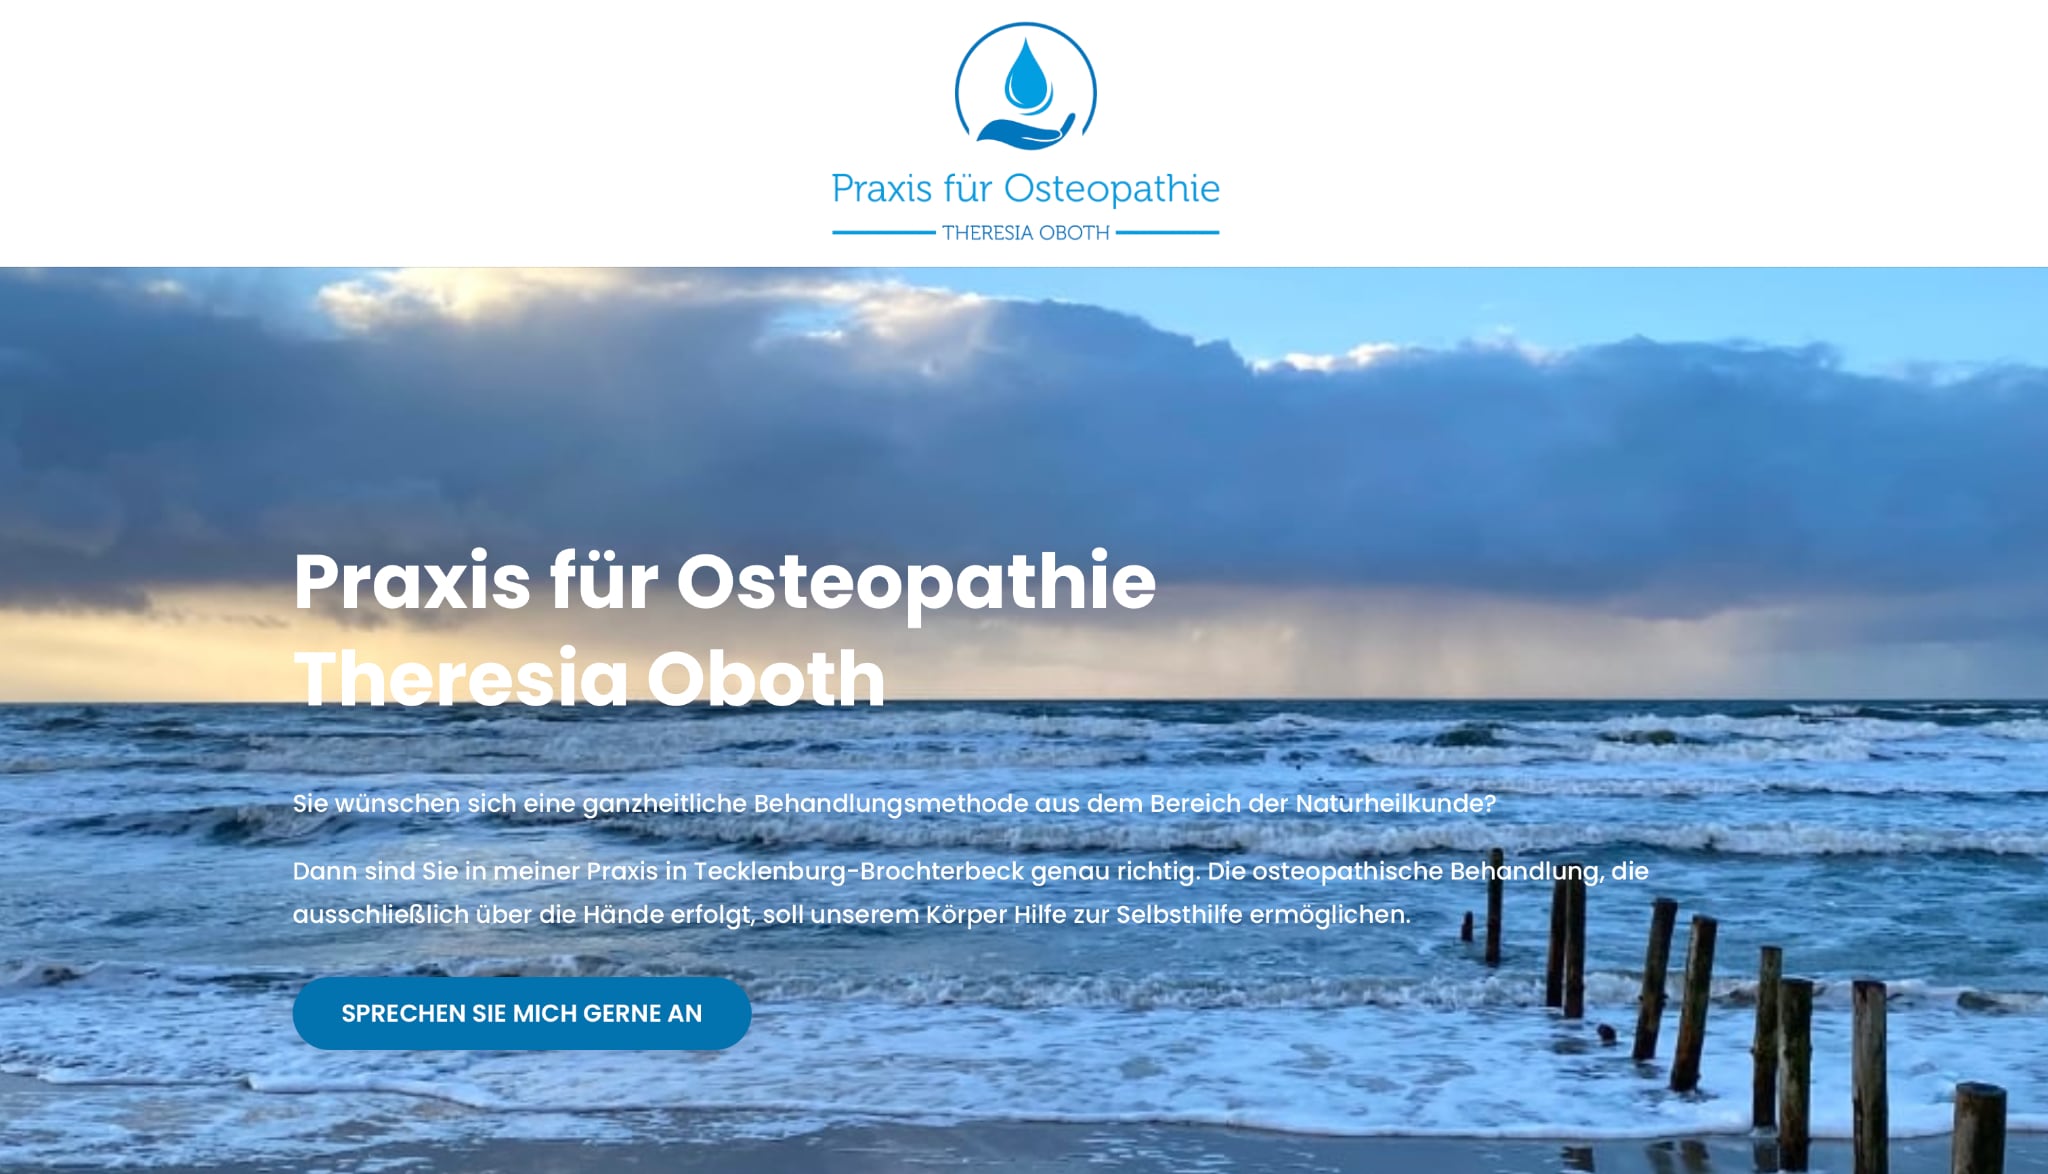 Praxis für Osteopathie Theresia Oboth - Brochterbeck